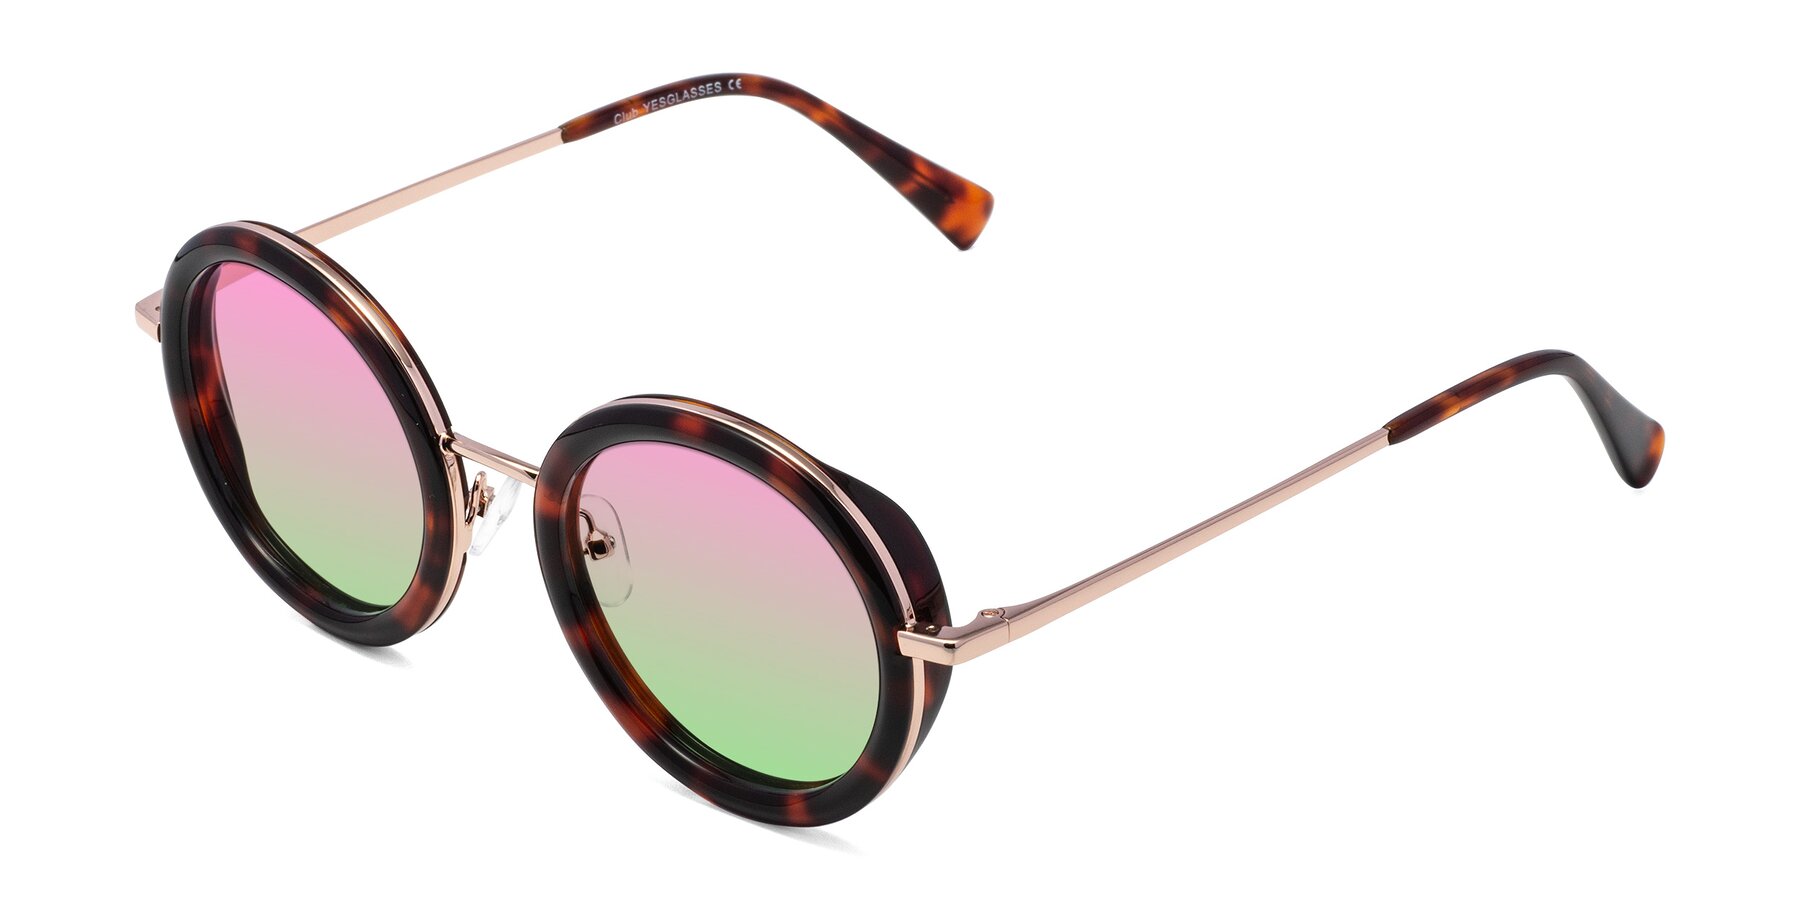 Angle of Club in Tortoise-Rose Gold with Pink / Green Gradient Lenses